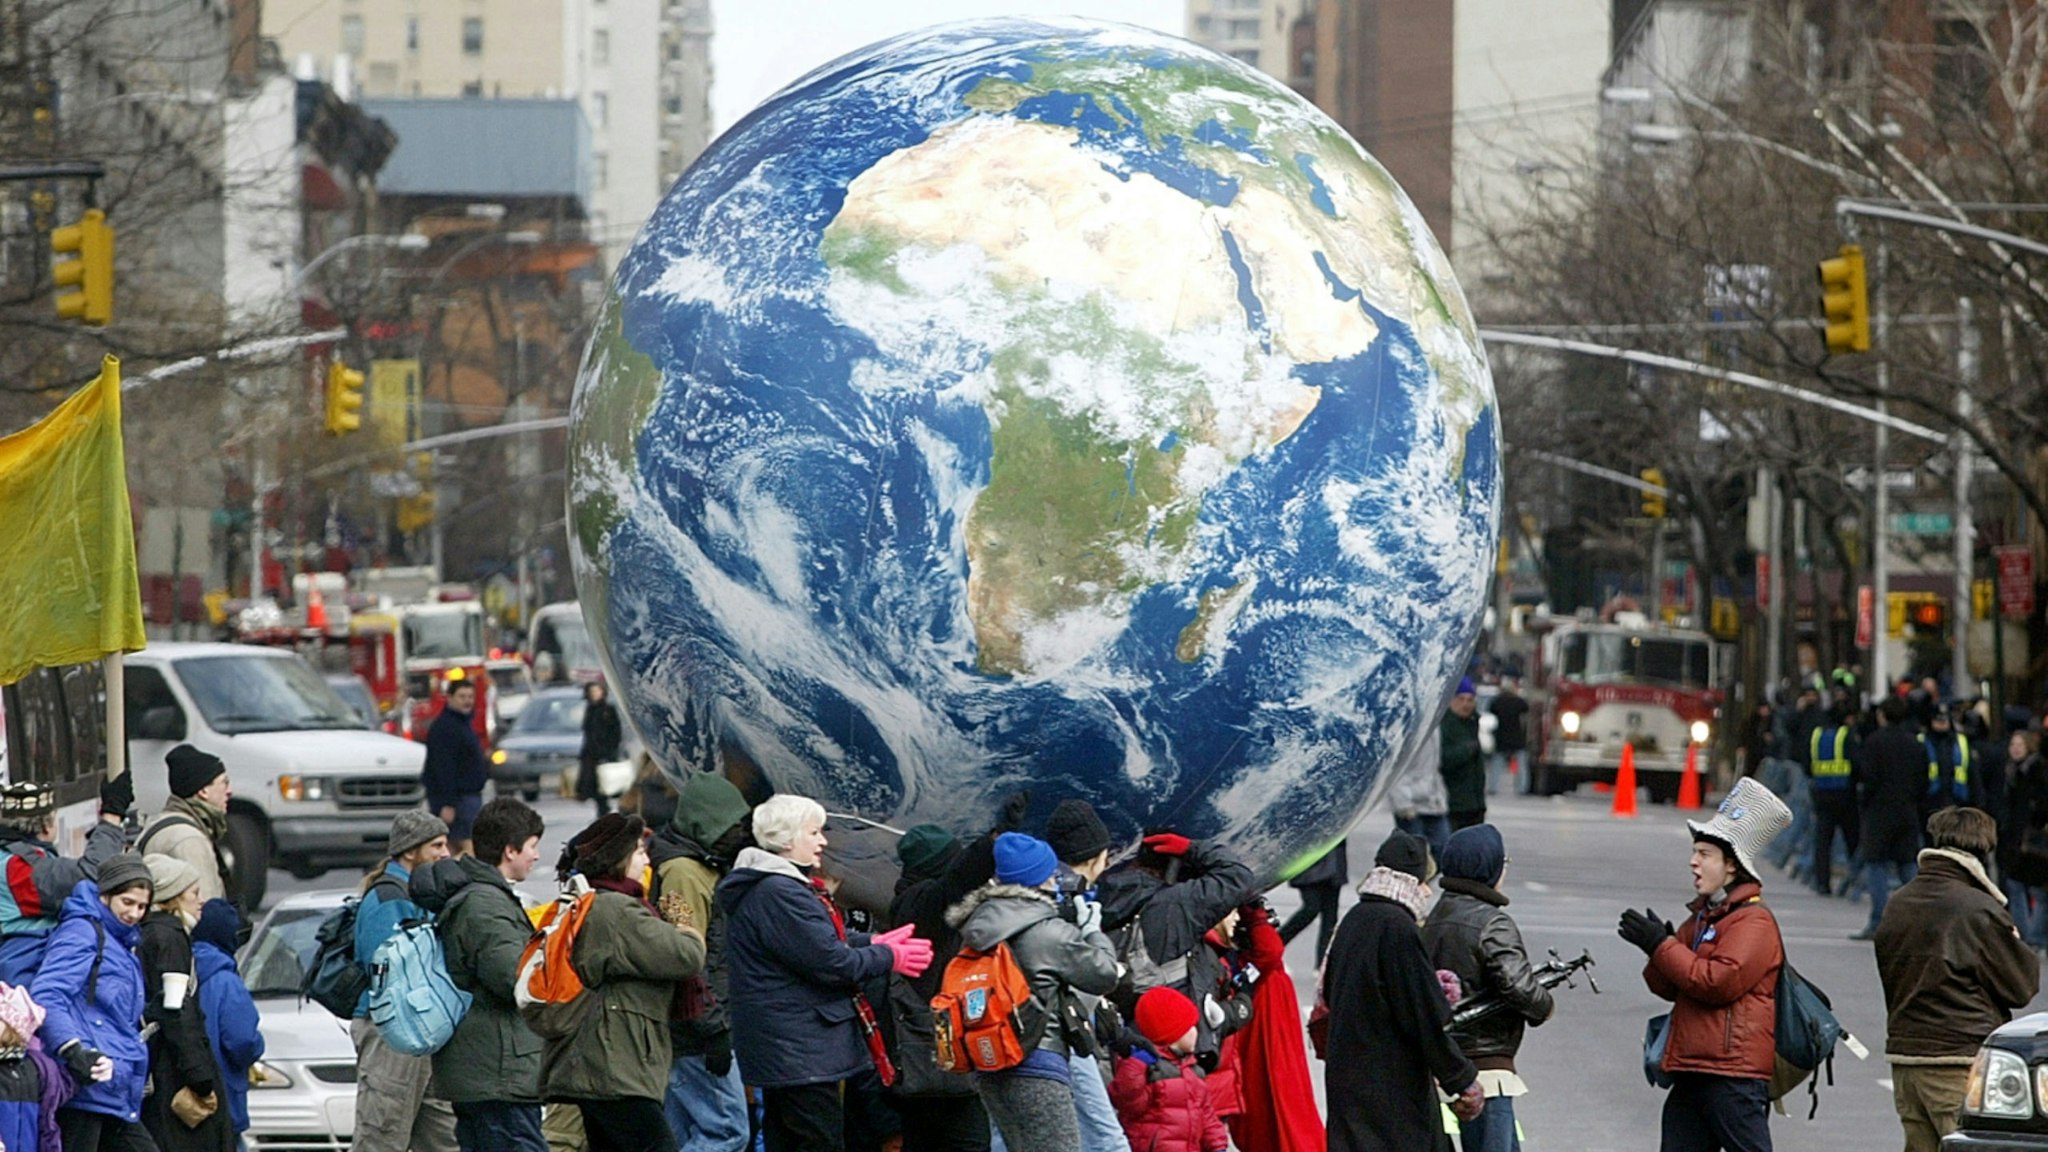 Protesters carry an inflatable globe during an anti-war demonstration February 15, 2003 in New York City. Tens of thousands attended the rally which coincided with peace demonstrations around the world.